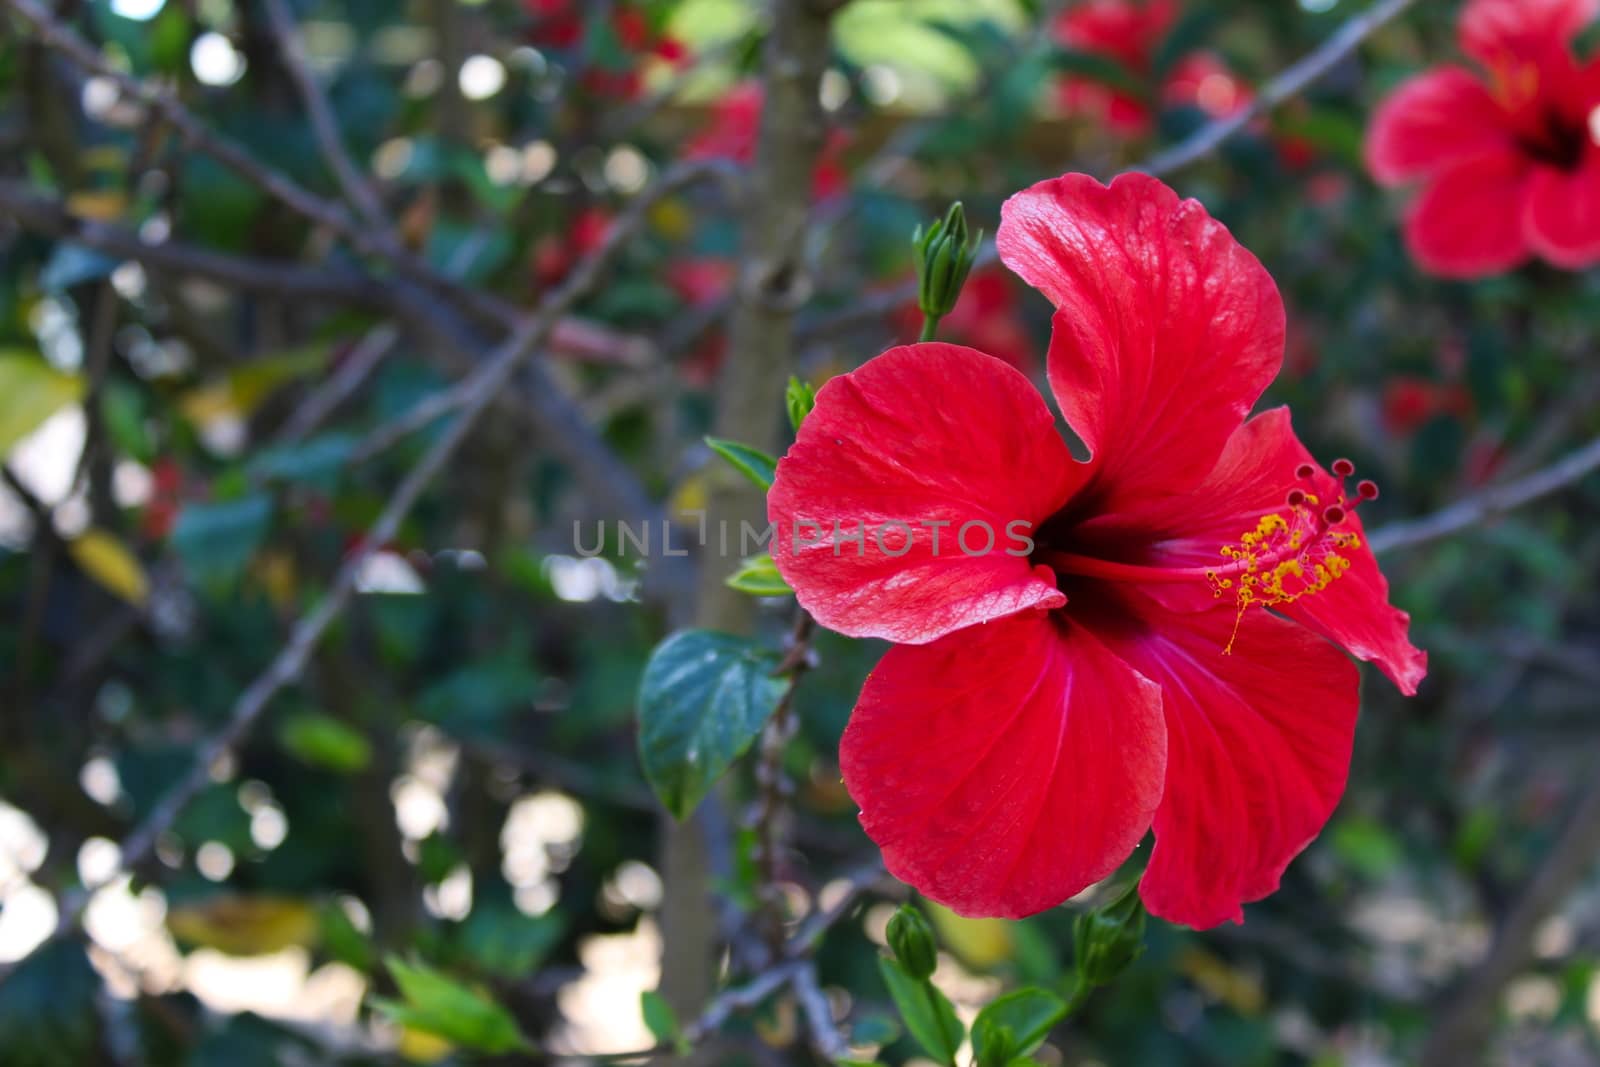 Beautiful hibiscus flower with details and green background. Hibiscus rosa-Sinensis, Chinese hibiscus, China rose, Hawaiian hibiscus, rose mallow, shoeblack plant. Beja, Portugal.